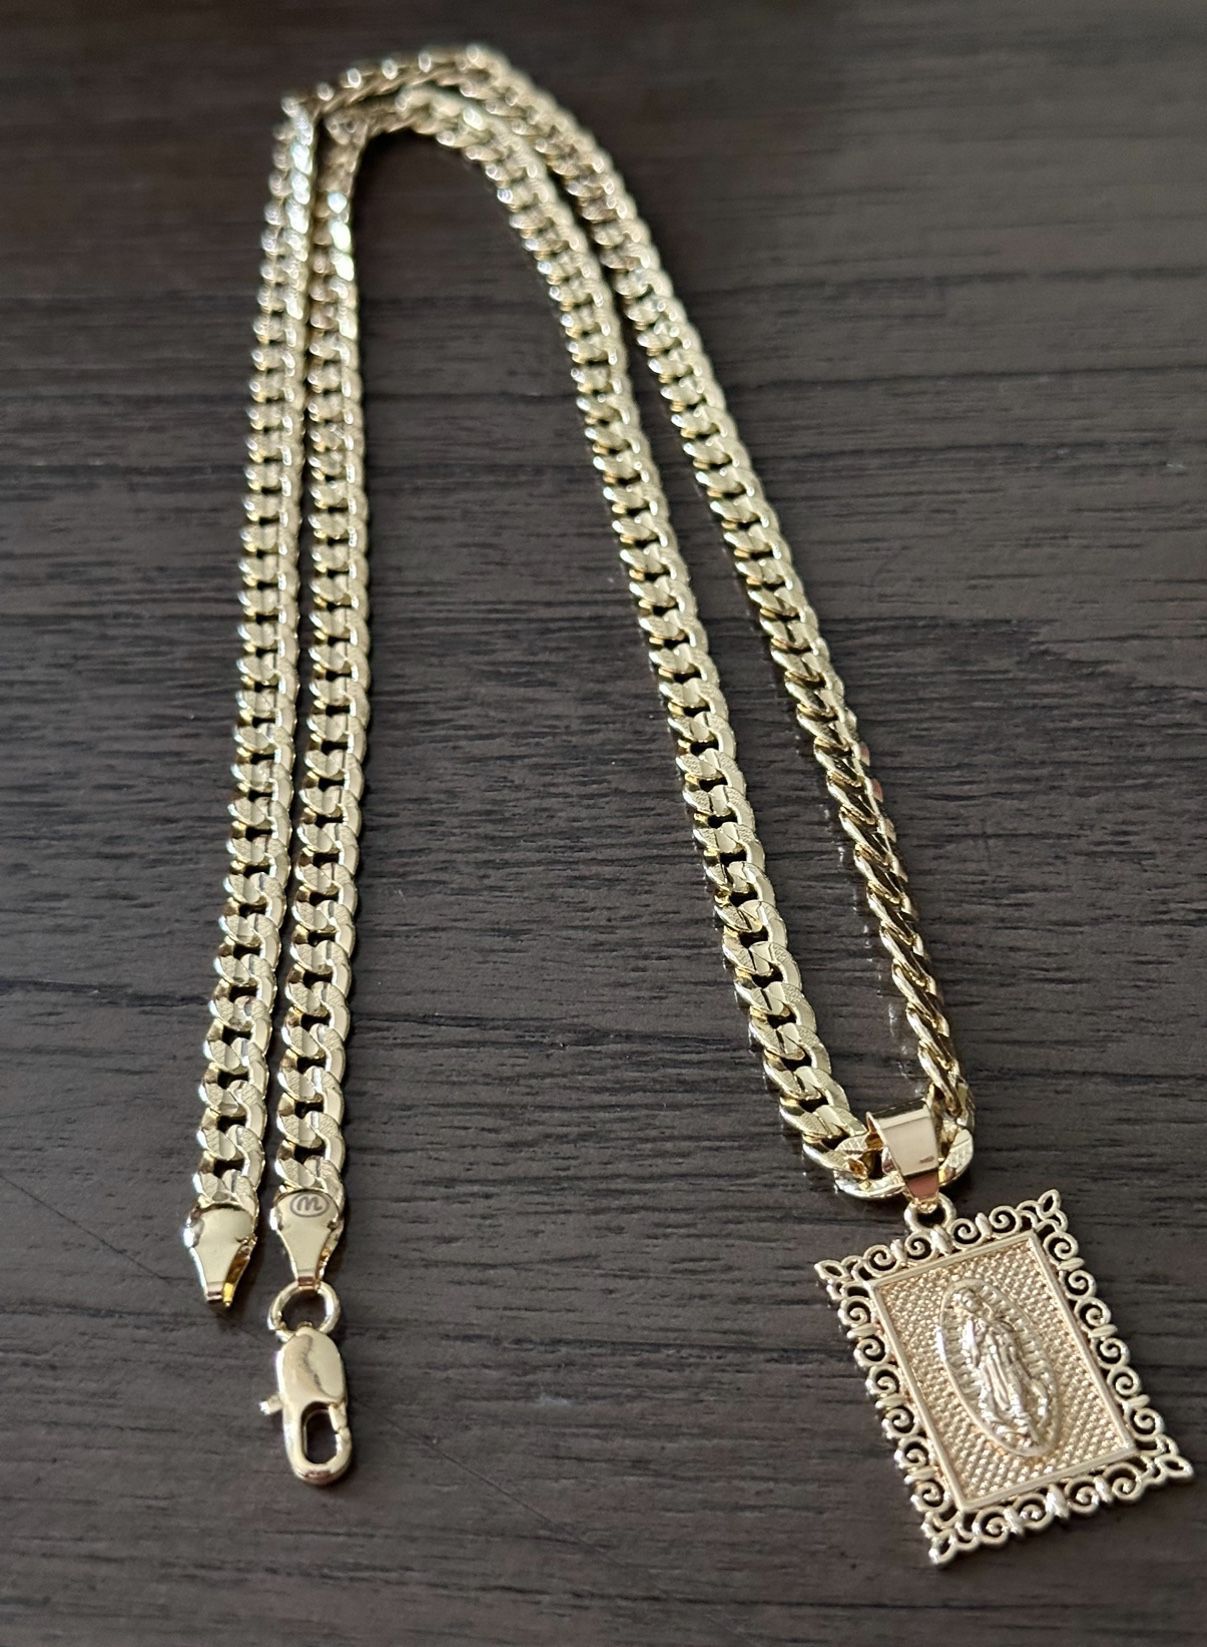 Gold Filled Cuban Chain With Square Virgin Pendant